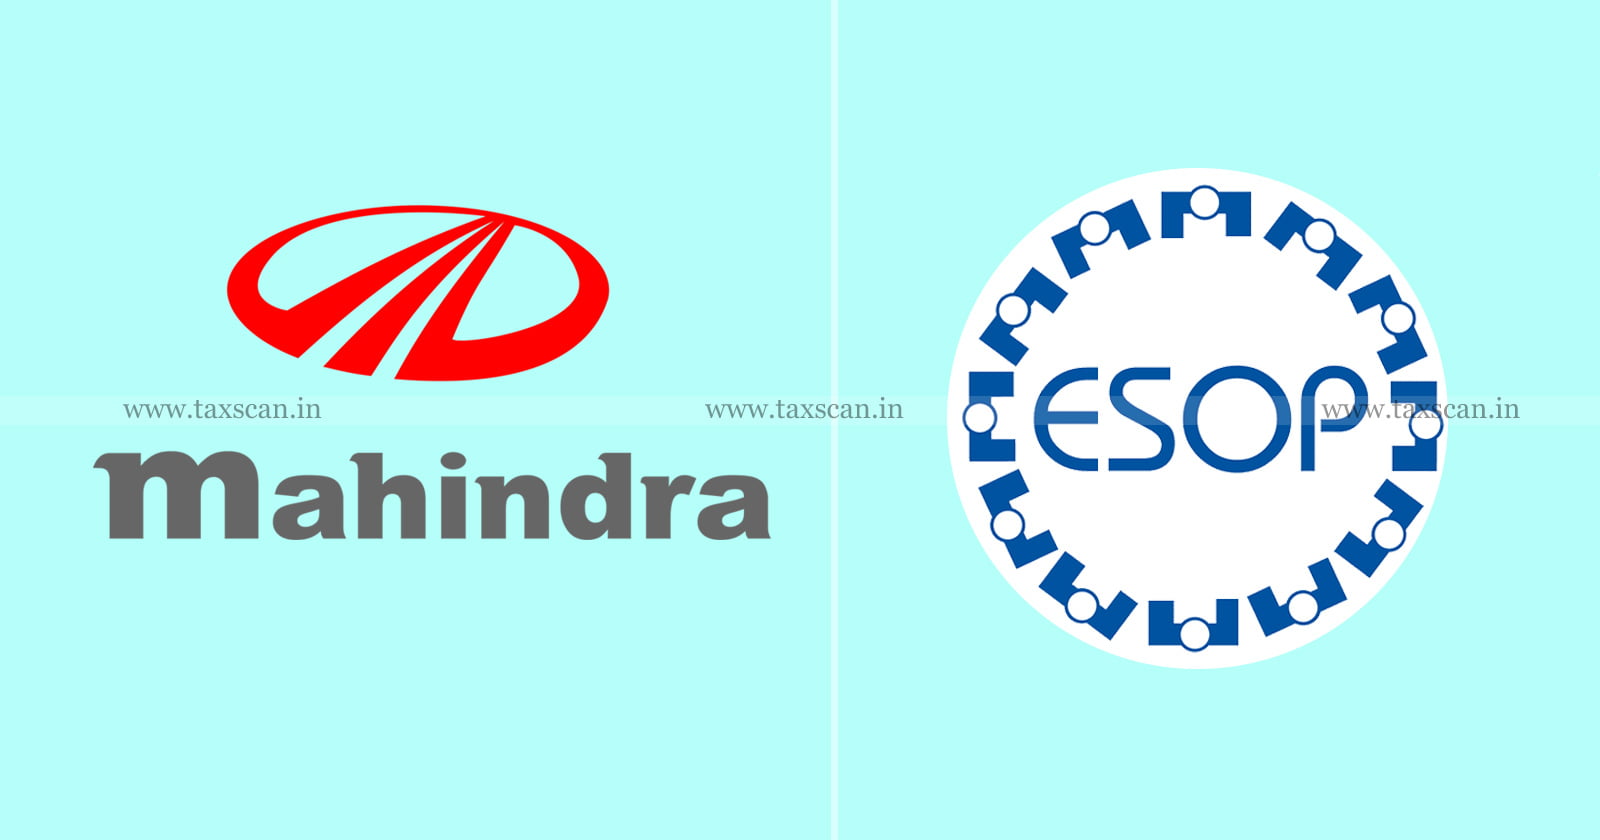 ESOP - difference - between - Exercise - Price - Market - Price - Deduction - ITAT - Mahindra - TAXSCAN